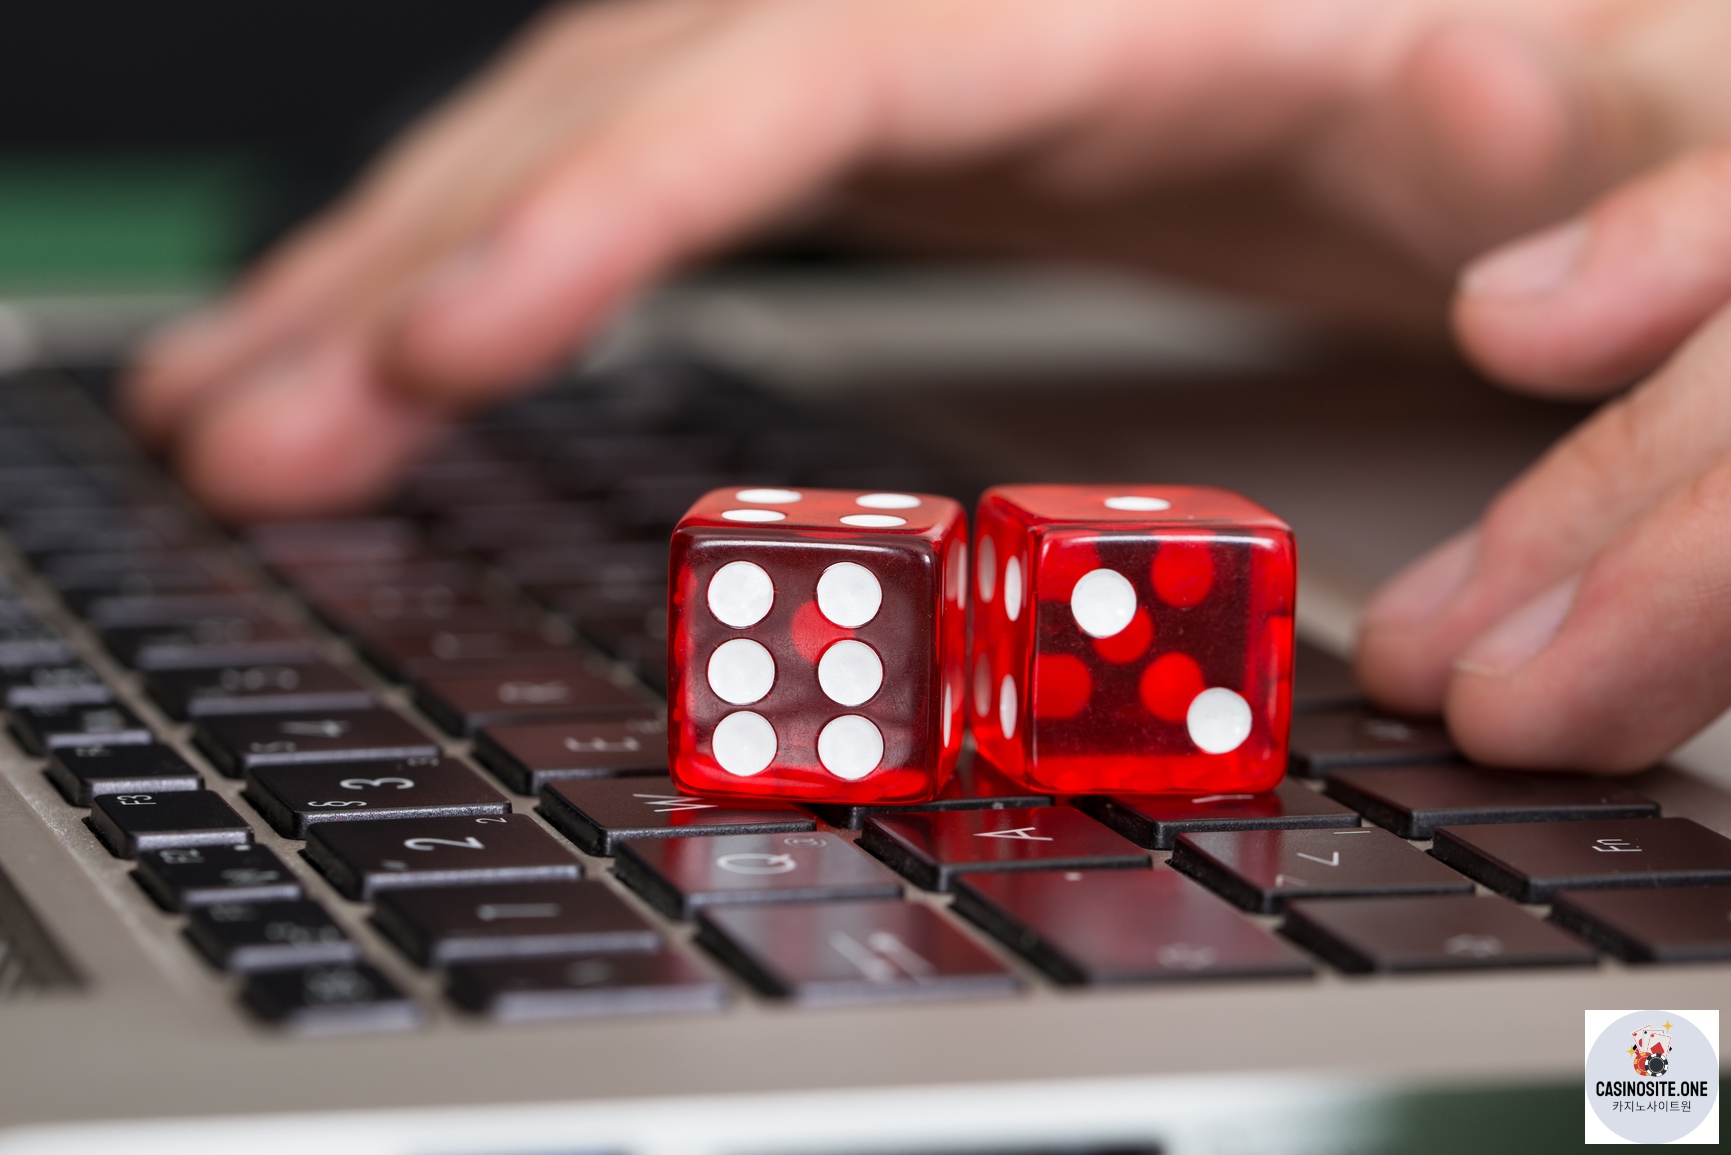 TYPES OF ONLINE GAMBLING IN THE PHILIPPINES